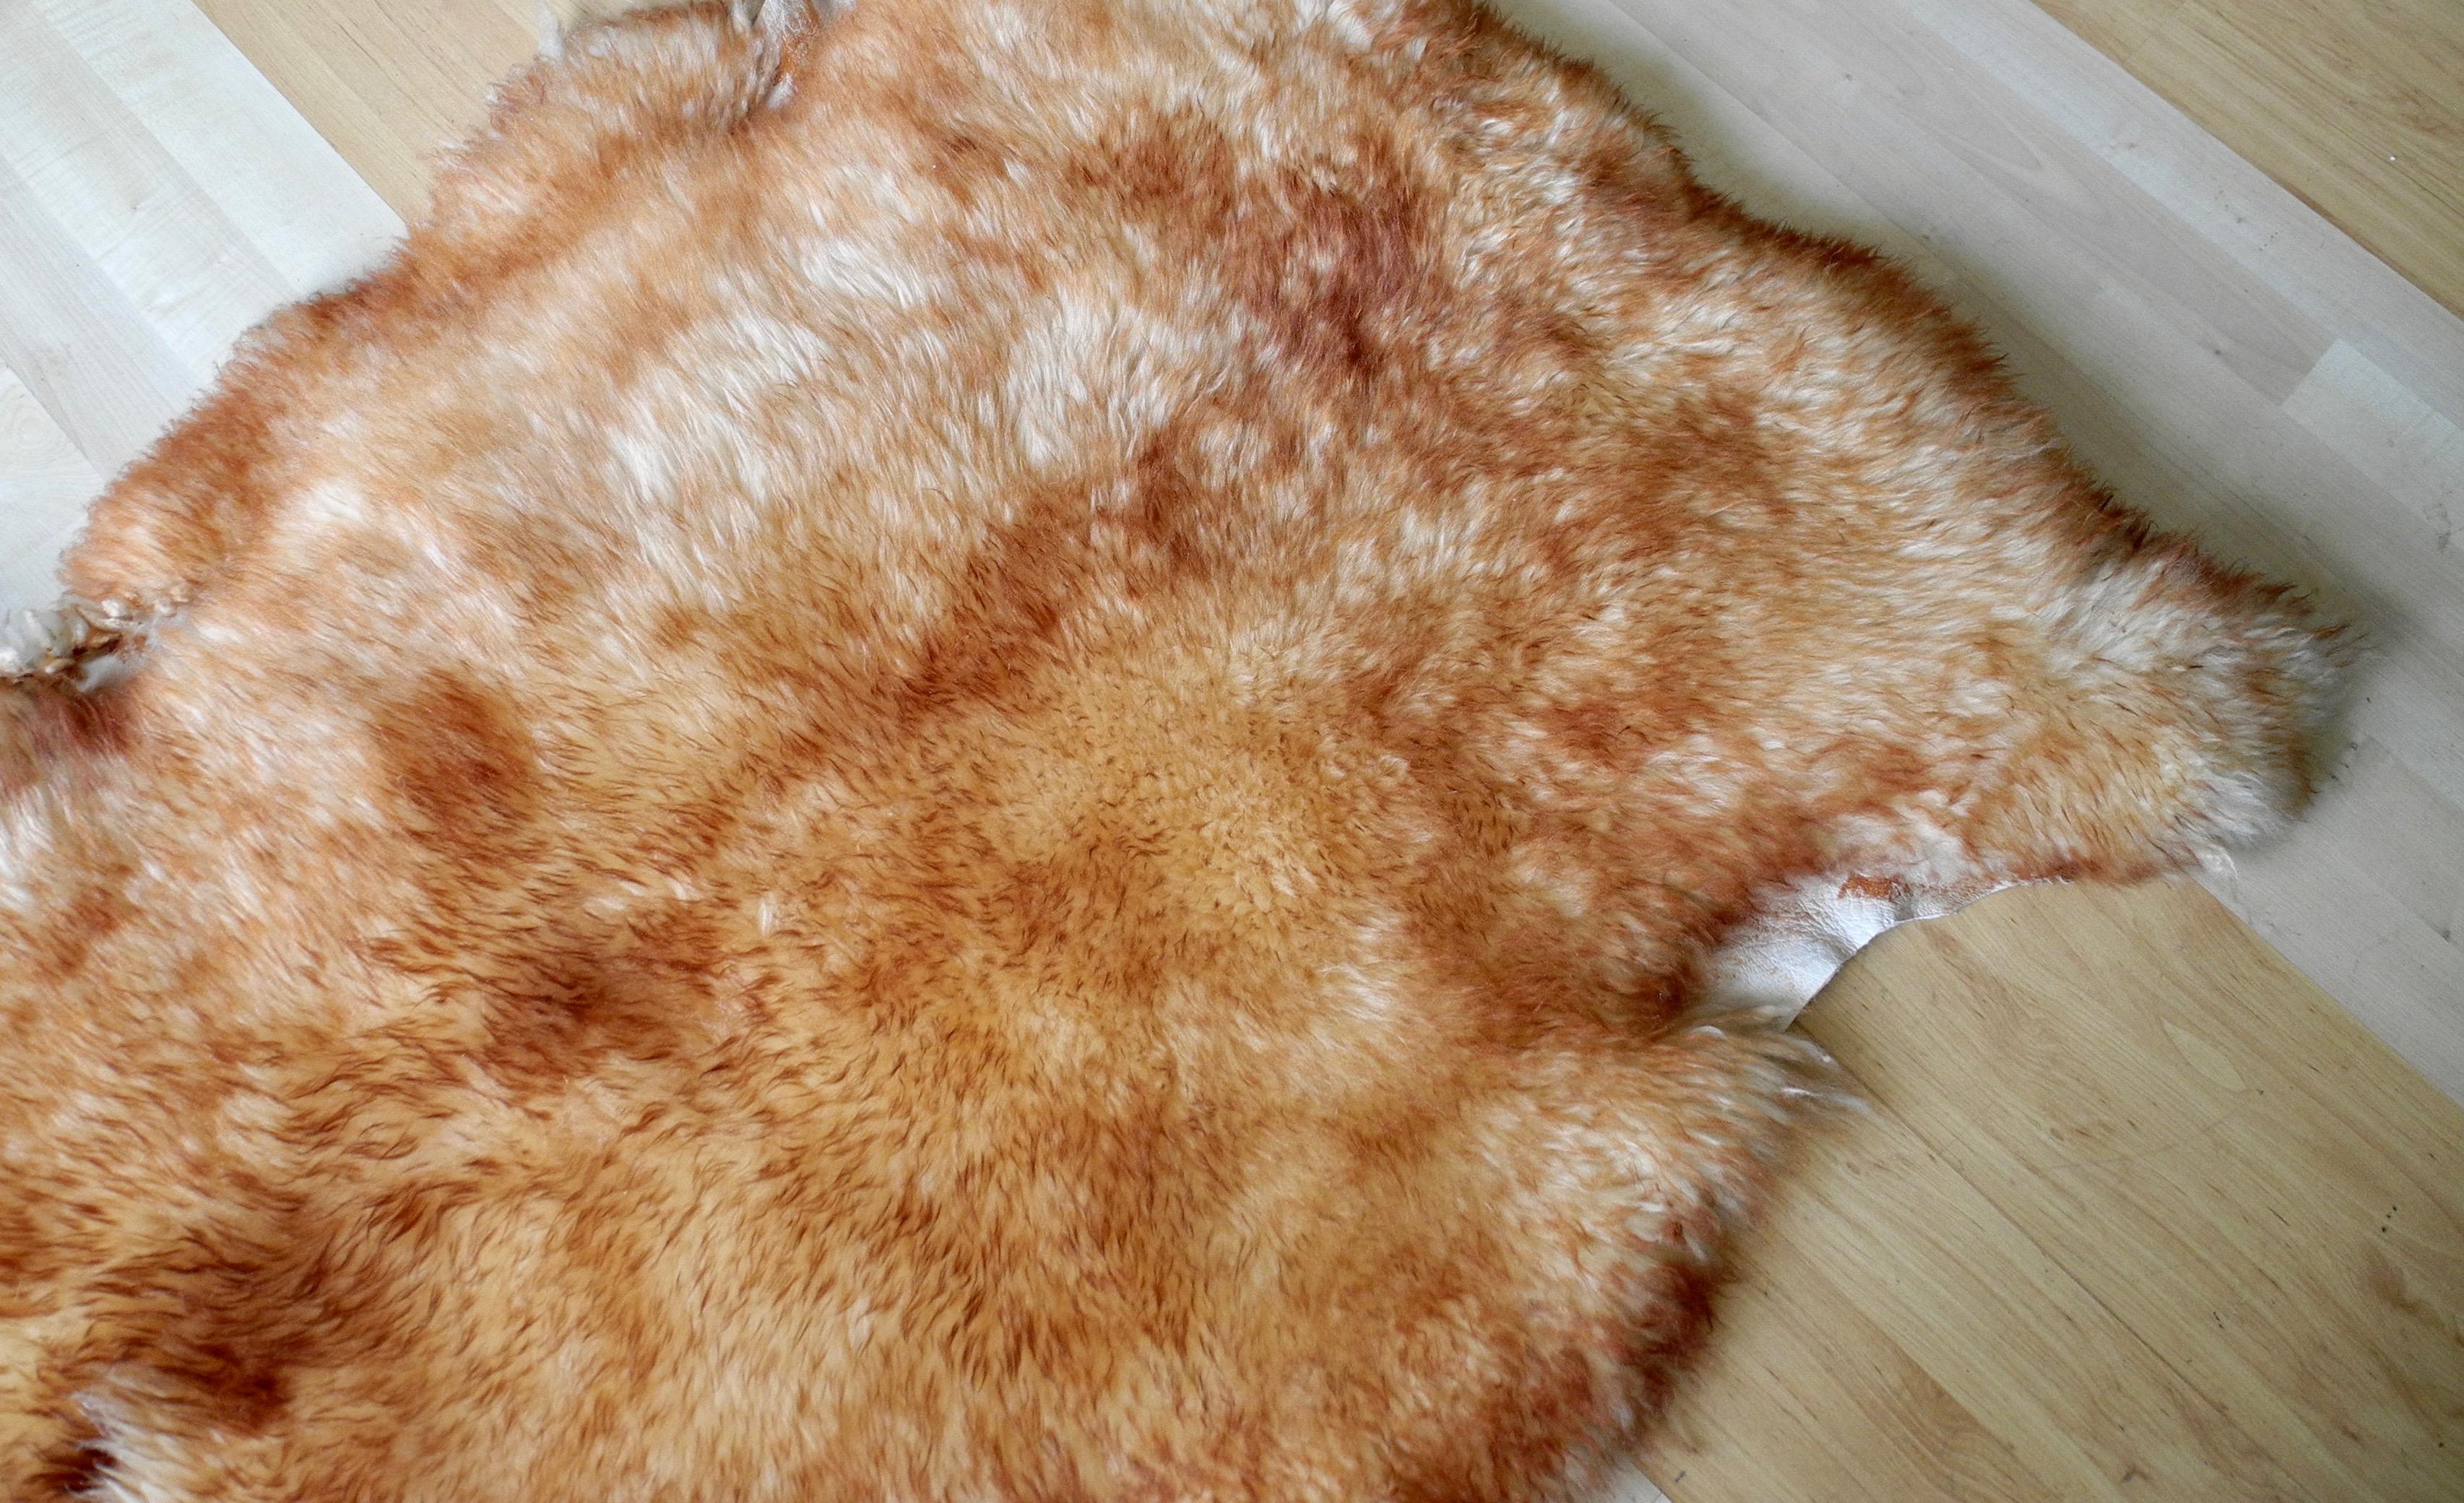 Modern Organic Rustic Large Sheepskin Rug or Furniture Cover In Good Condition For Sale In Hudson, NY